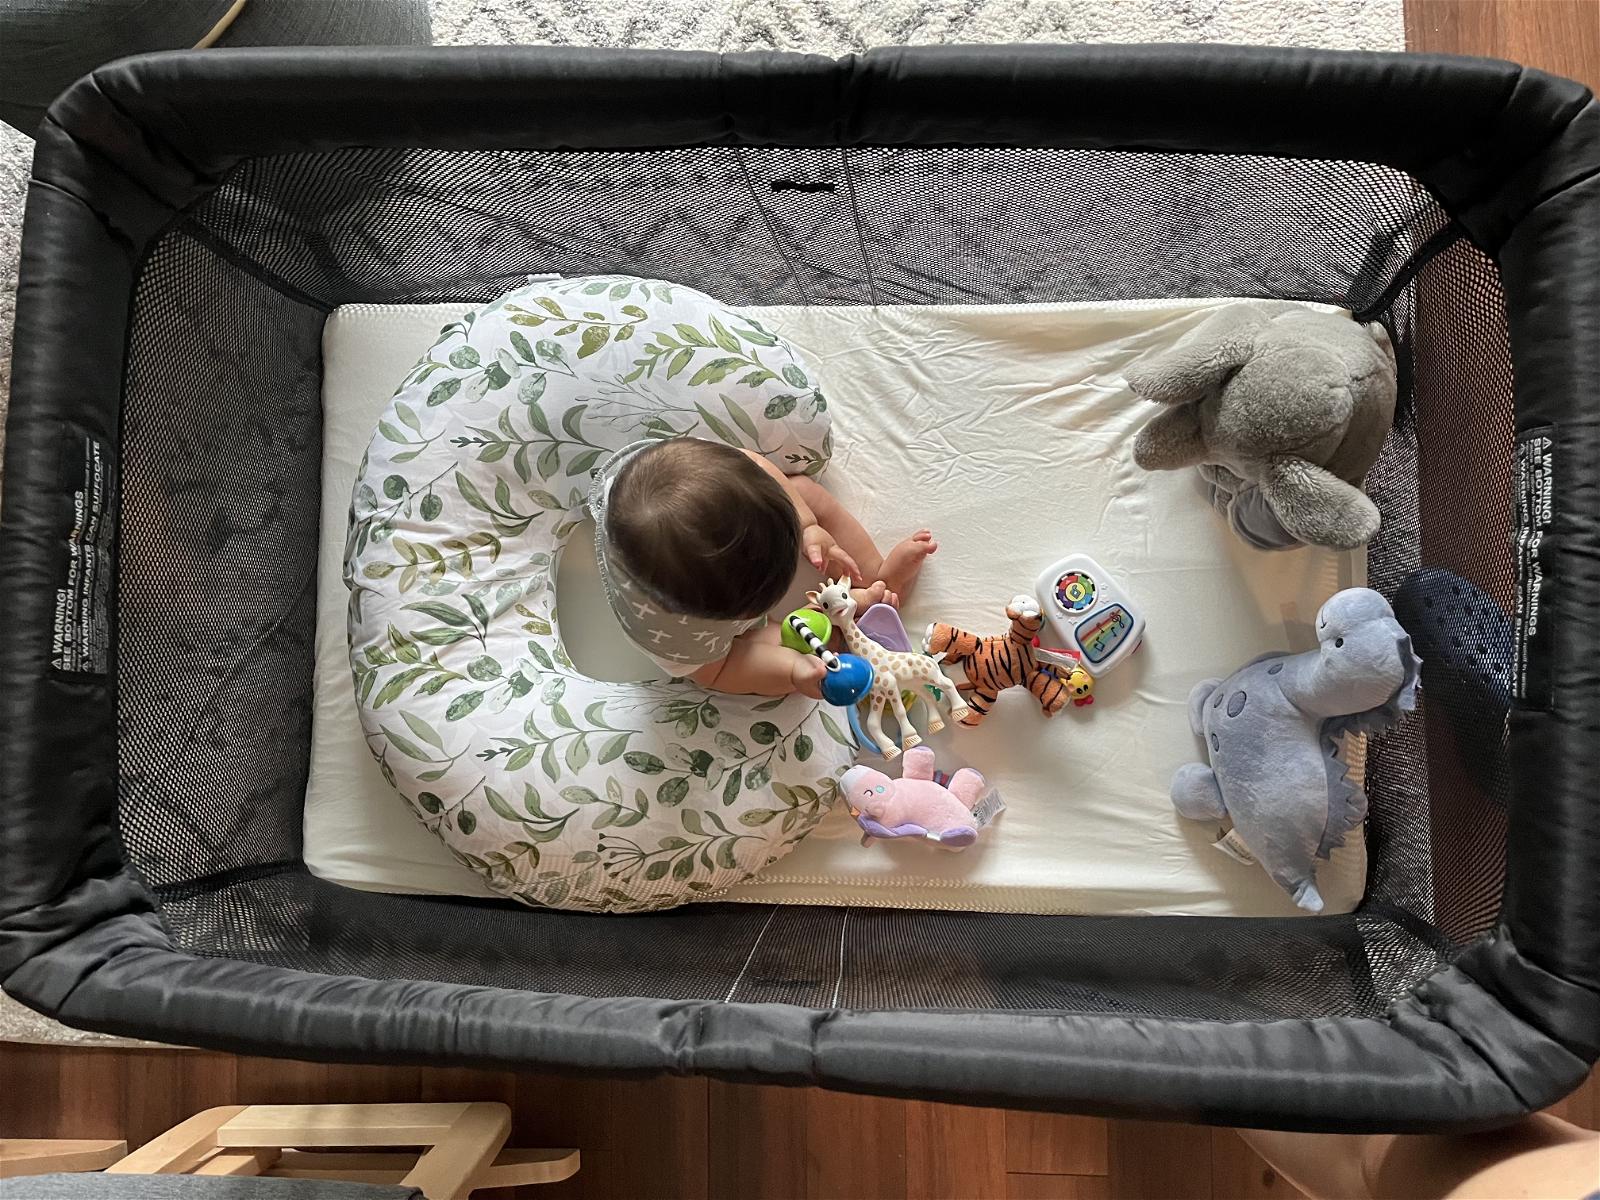 BabyBjorn Travel Crib Light Review (Tried &amp; Tested)